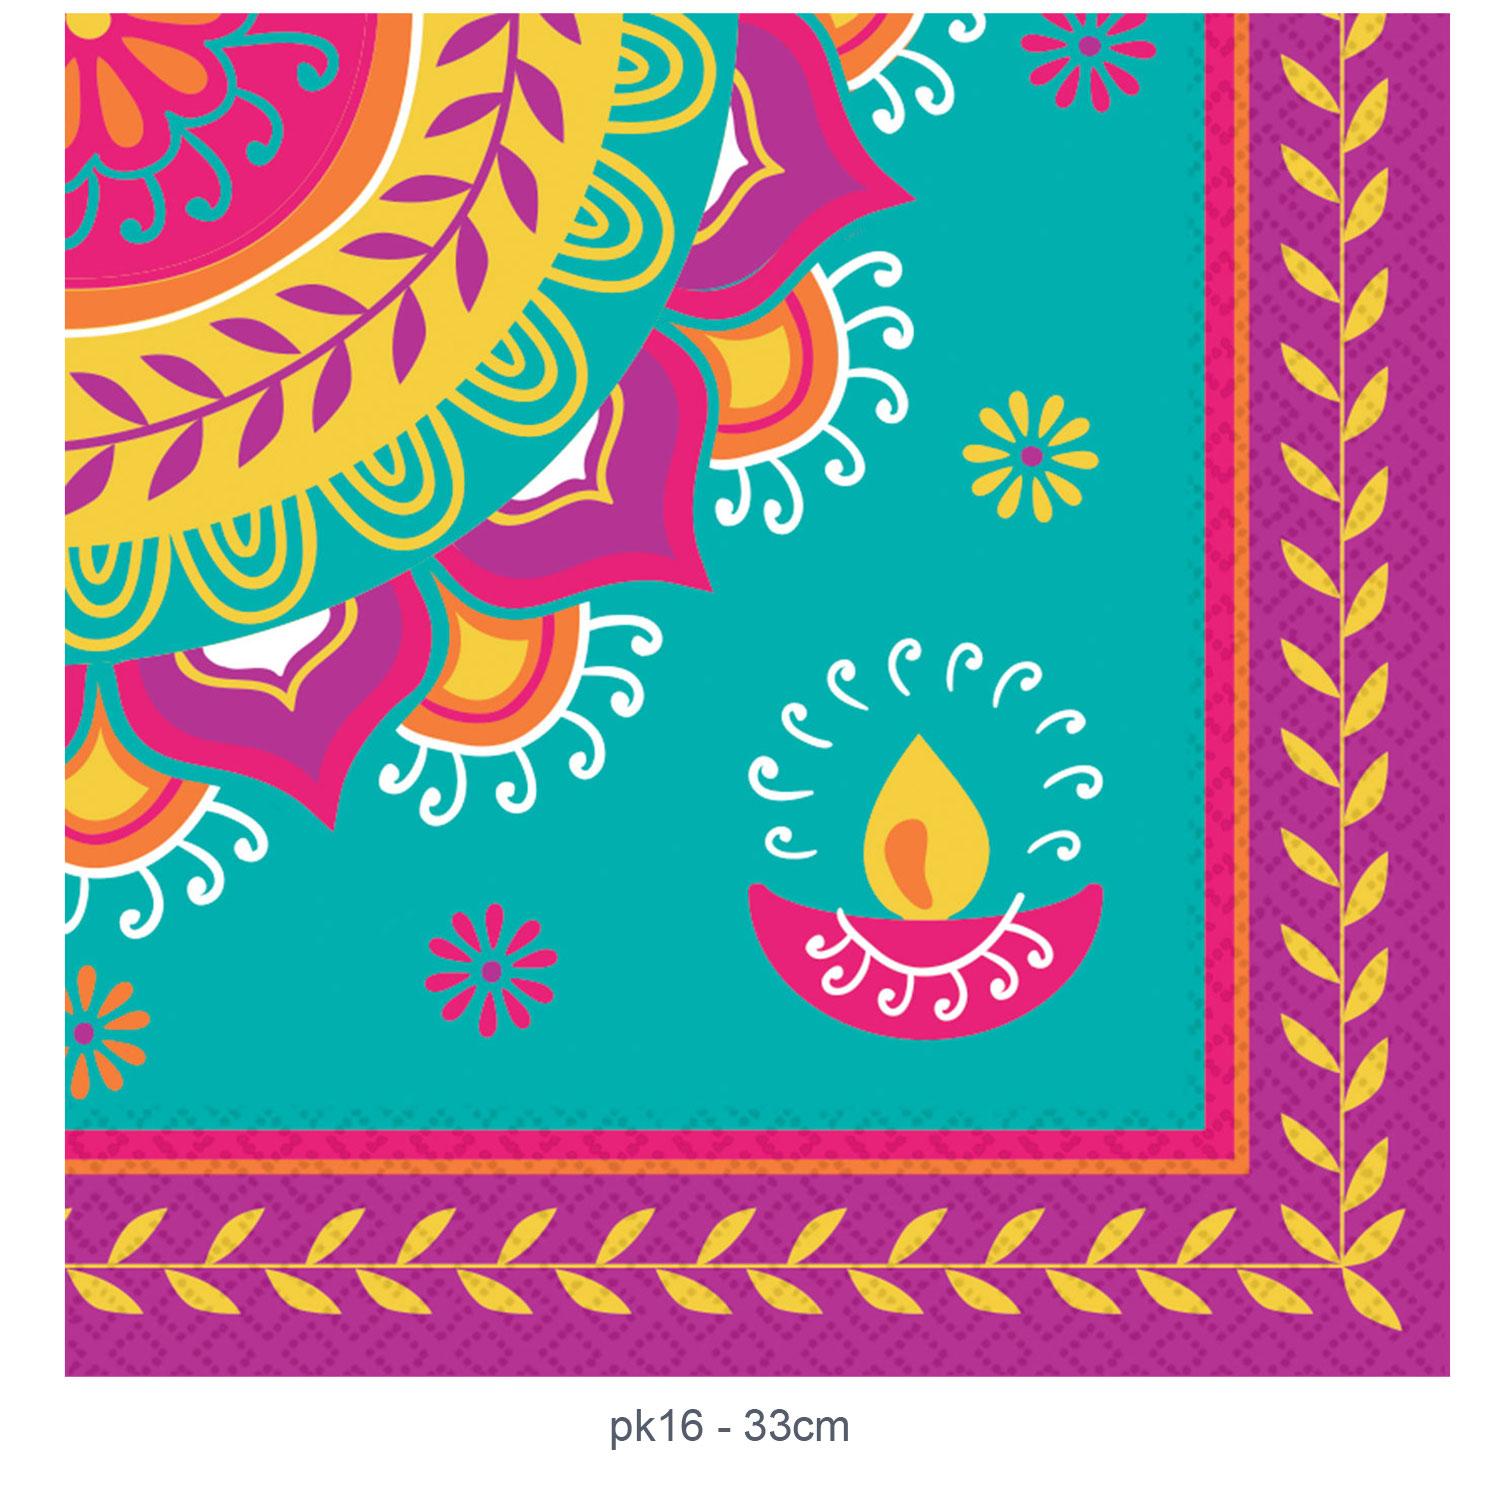 Diwali Celebrations Luncheon Napkins 33cm pk16 by Amscan 512413 available here at Karnival Costumes online party shop